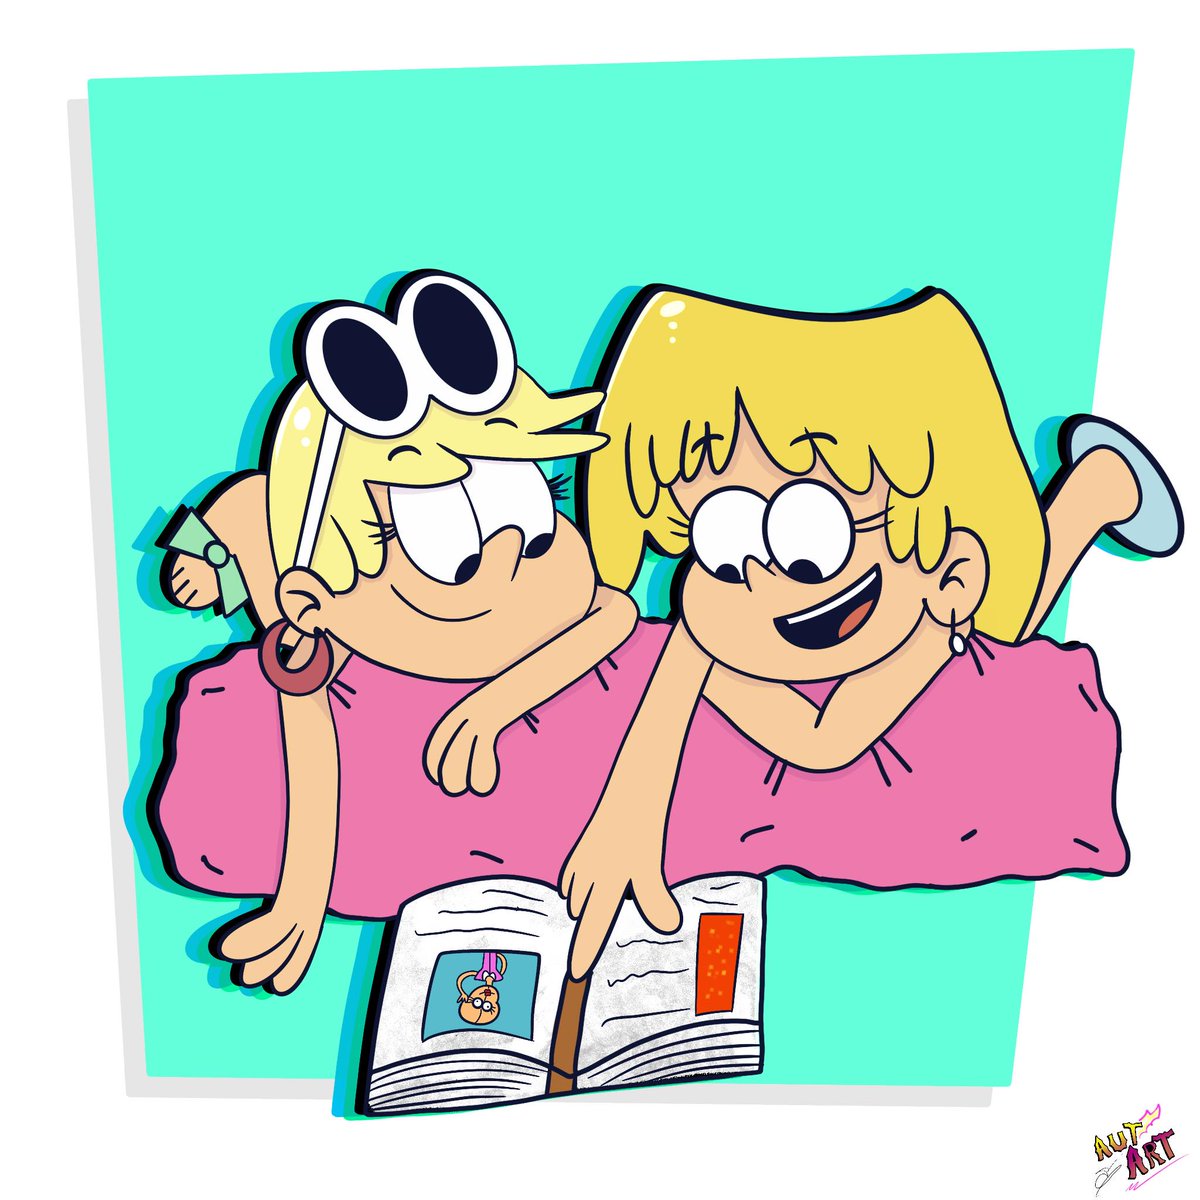 Lori and leni 📖
#TheLoudHouse #TheLoudHousefanart #LoriLoud #lori_loud #LeniLoud  #leni_loud
Picture of Lori Leni Luna with her partner, coming soon.